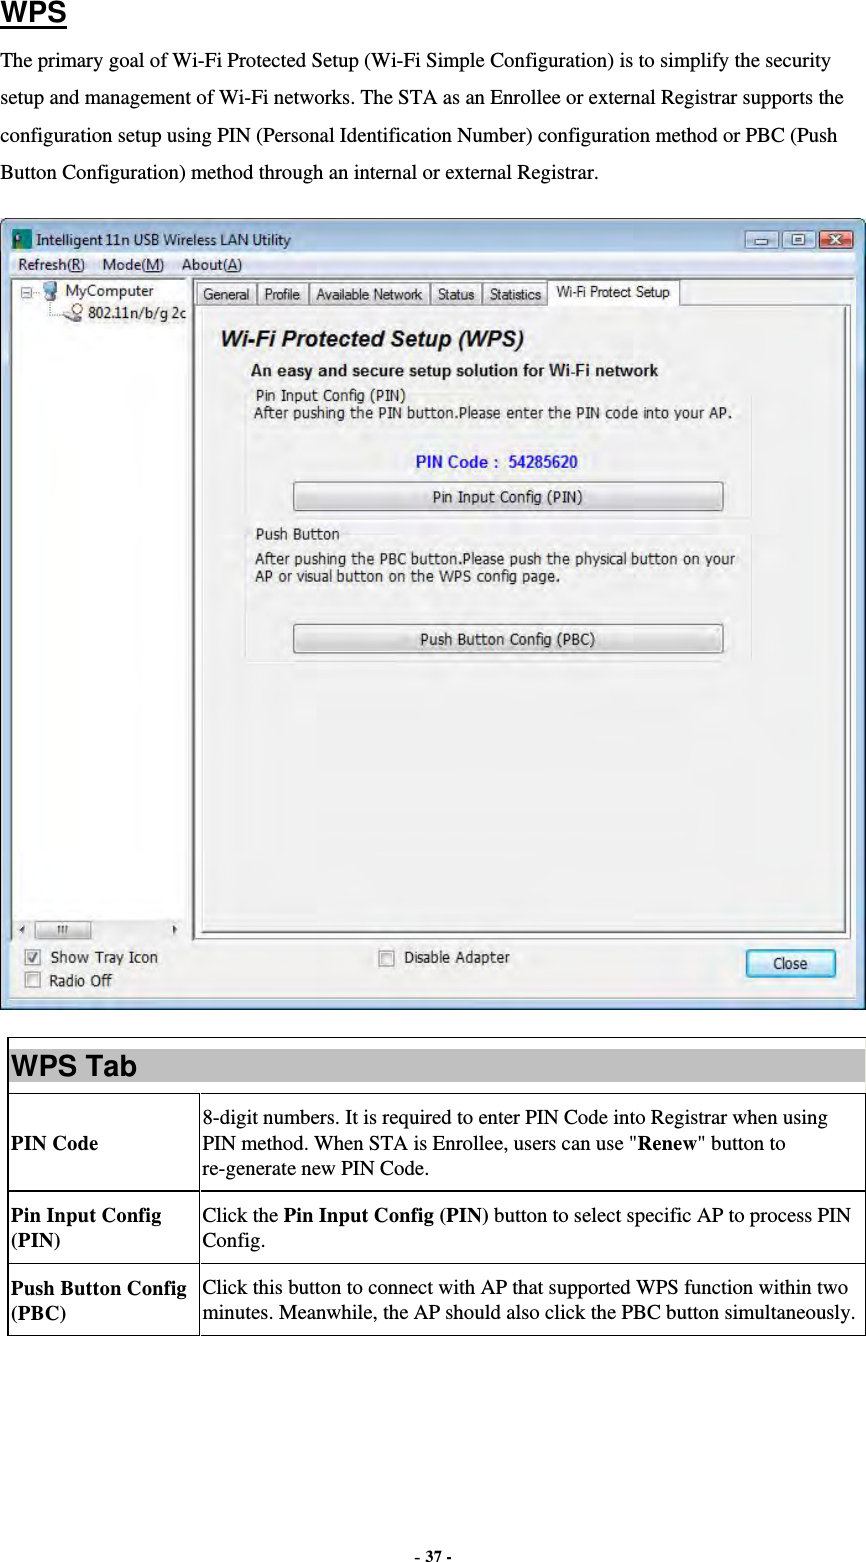  - 37 - WPS The primary goal of Wi-Fi Protected Setup (Wi-Fi Simple Configuration) is to simplify the security setup and management of Wi-Fi networks. The STA as an Enrollee or external Registrar supports the configuration setup using PIN (Personal Identification Number) configuration method or PBC (Push Button Configuration) method through an internal or external Registrar.  WPS Tab PIN Code 8-digit numbers. It is required to enter PIN Code into Registrar when using PIN method. When STA is Enrollee, users can use &quot;Renew&quot; button to re-generate new PIN Code. Pin Input Config (PIN) Click the Pin Input Config (PIN) button to select specific AP to process PIN Config. Push Button Config (PBC) Click this button to connect with AP that supported WPS function within two minutes. Meanwhile, the AP should also click the PBC button simultaneously.    